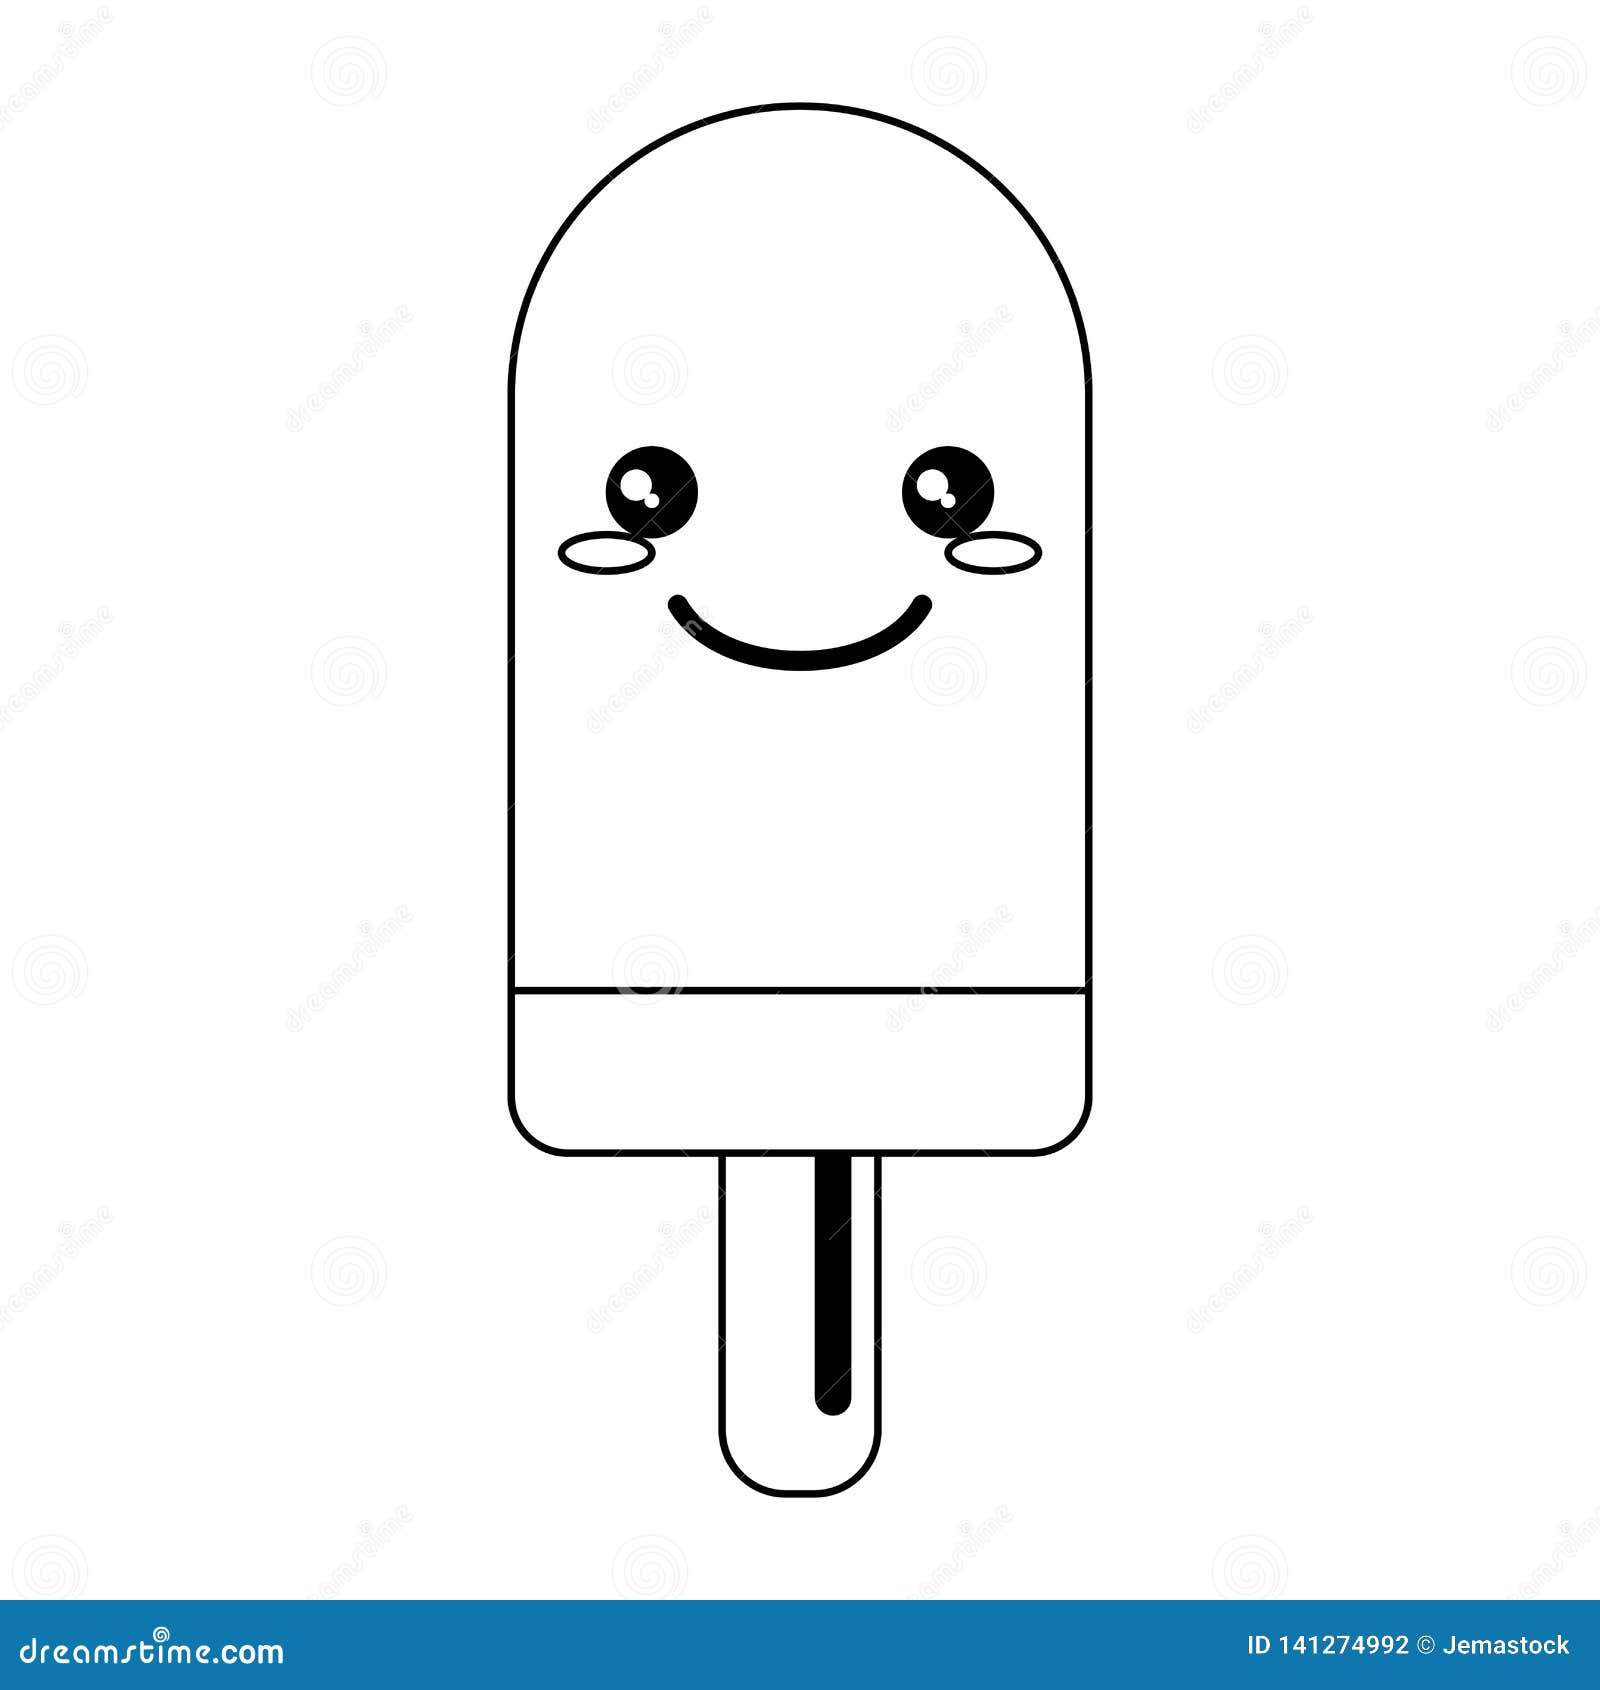 Popsicle with wooden stick black and white, Stock vector